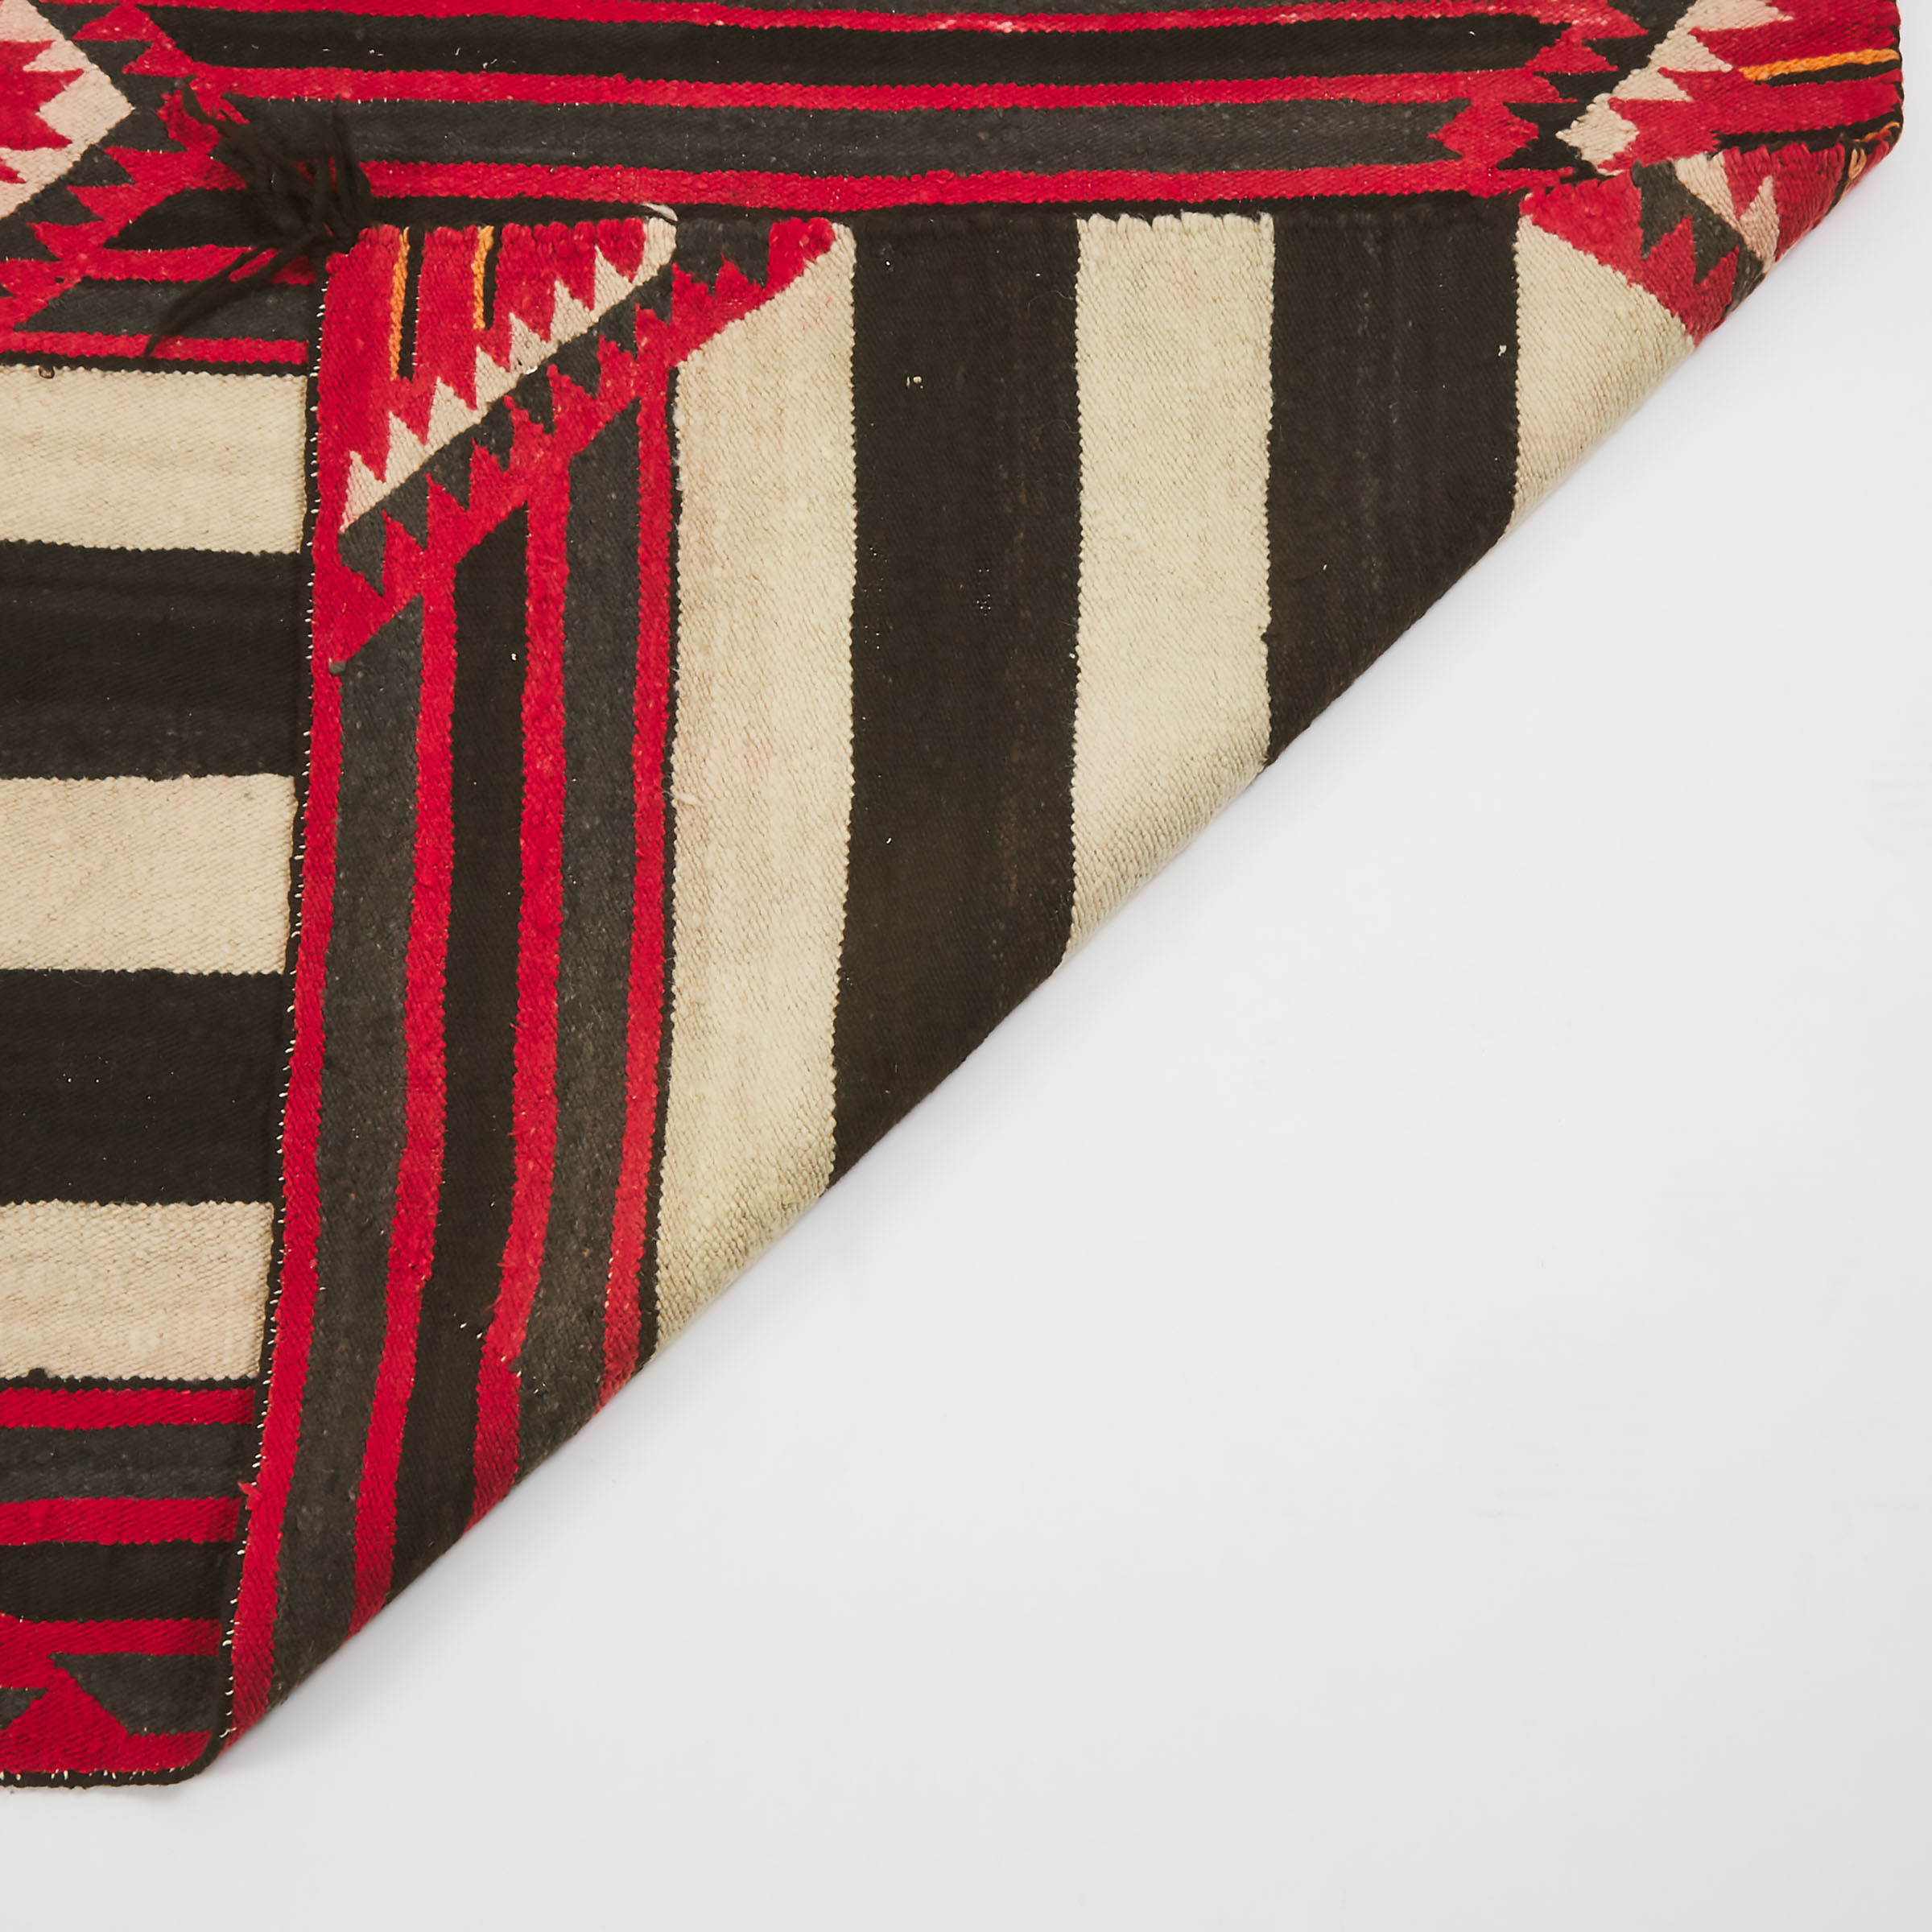 Navajo Third Phase Chief's Blanket, late 19th to early 20th century